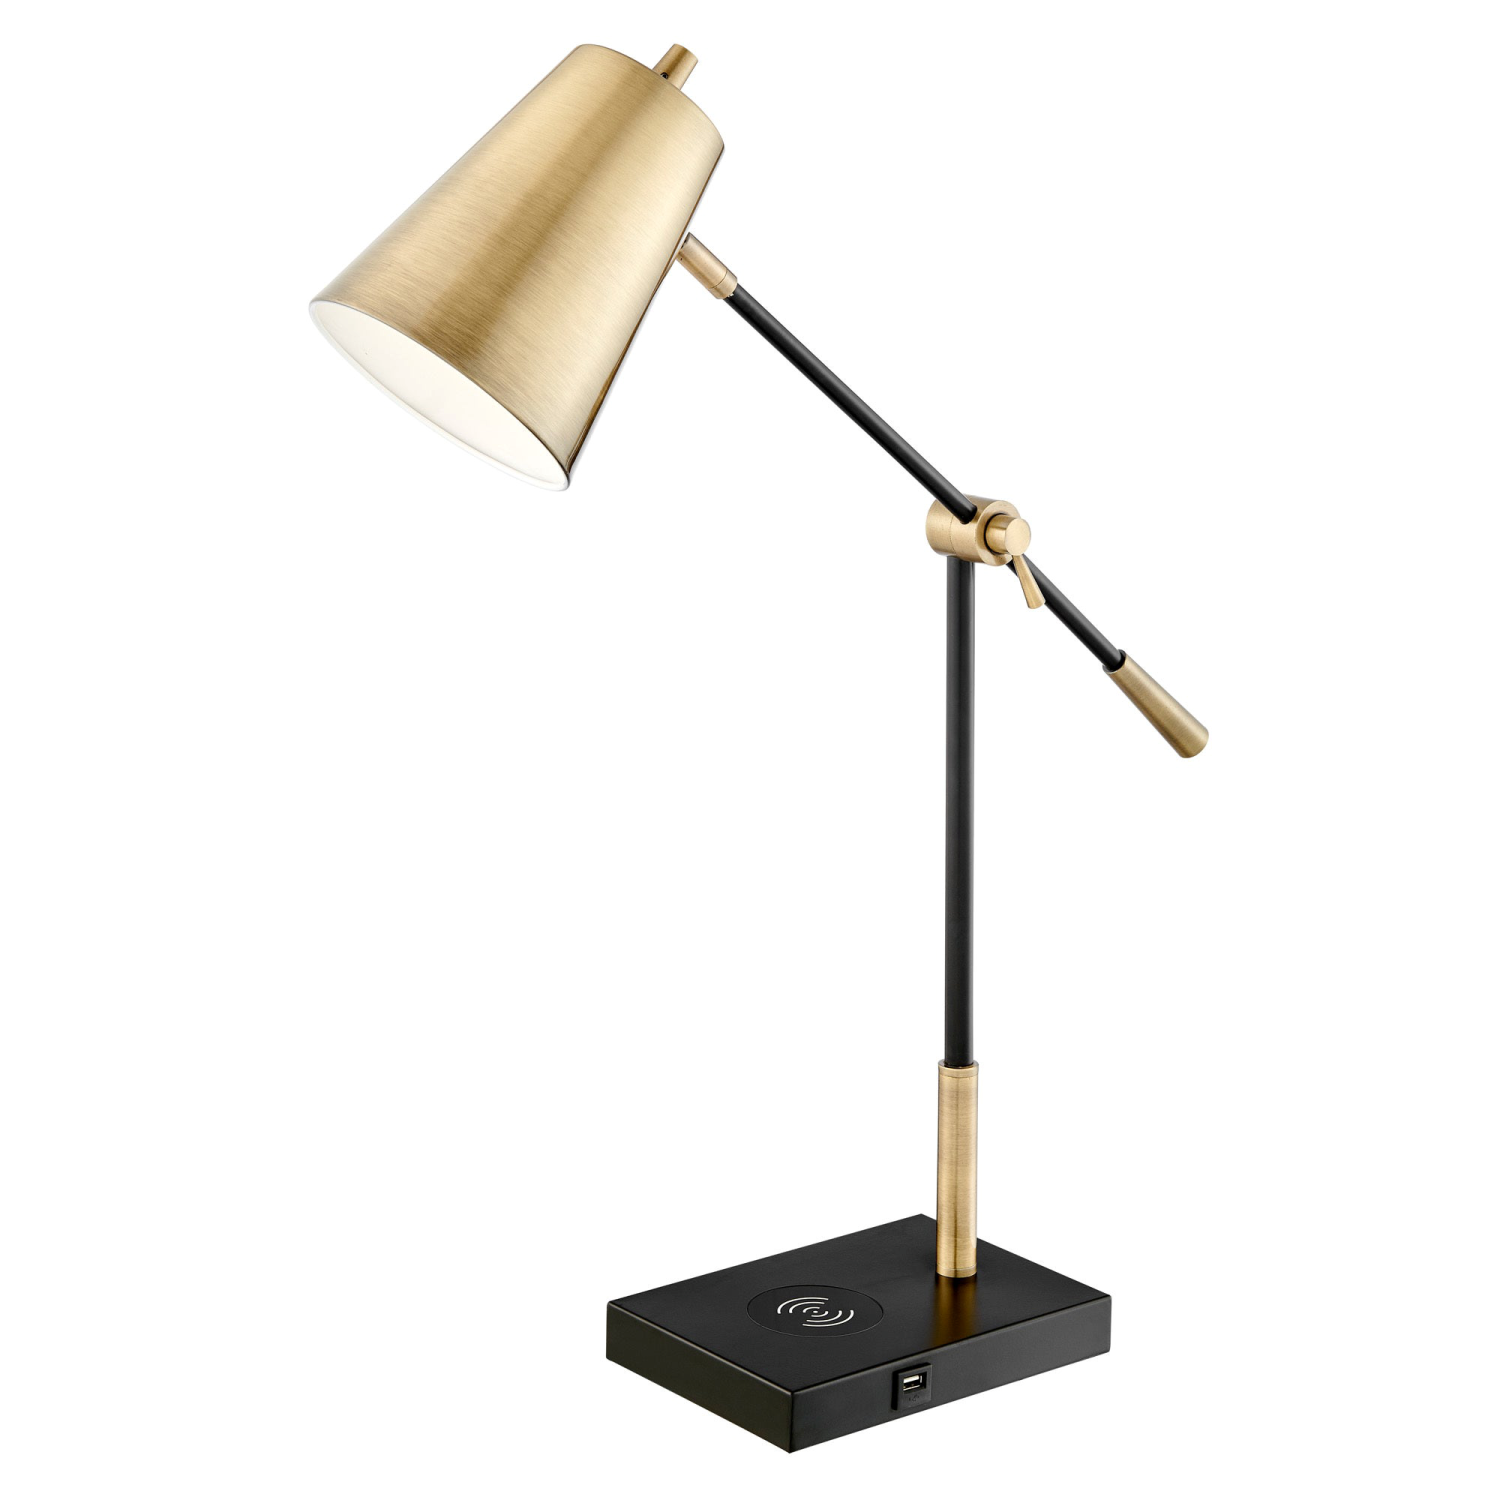 Salma Desk Lamp Color Option Black with Gold Finish Accents